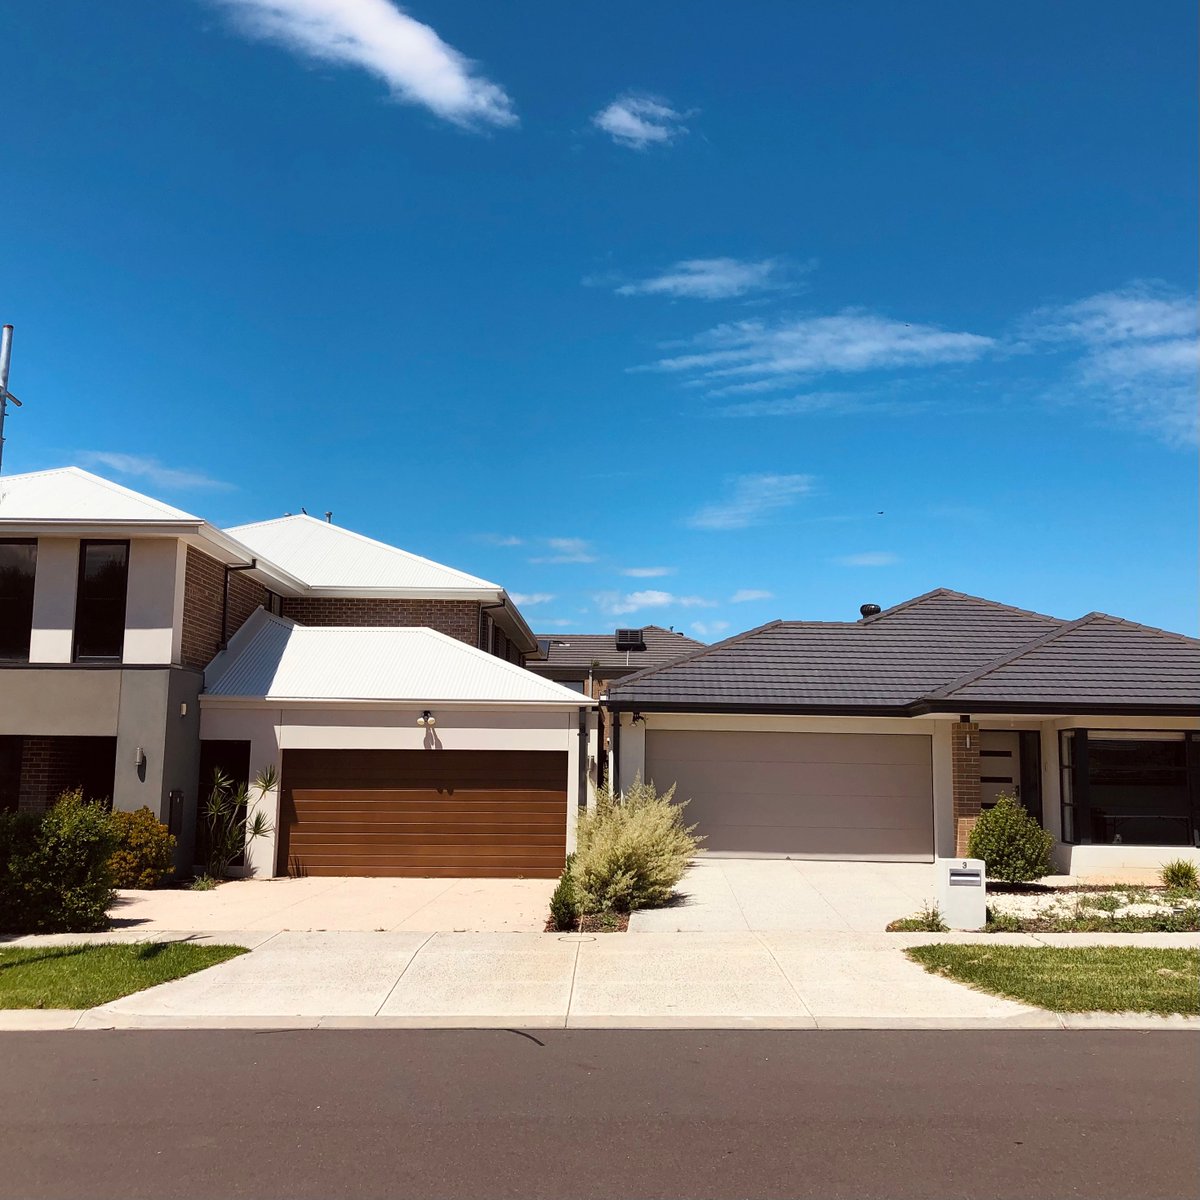 On a hot day, lighter cool roofing can reduce indoor temperatures by up to 10°C and surface temperatures by 30°.
📸 today in Williams Landing, Vic. 
#UrbanHeatIsland #Melbourne